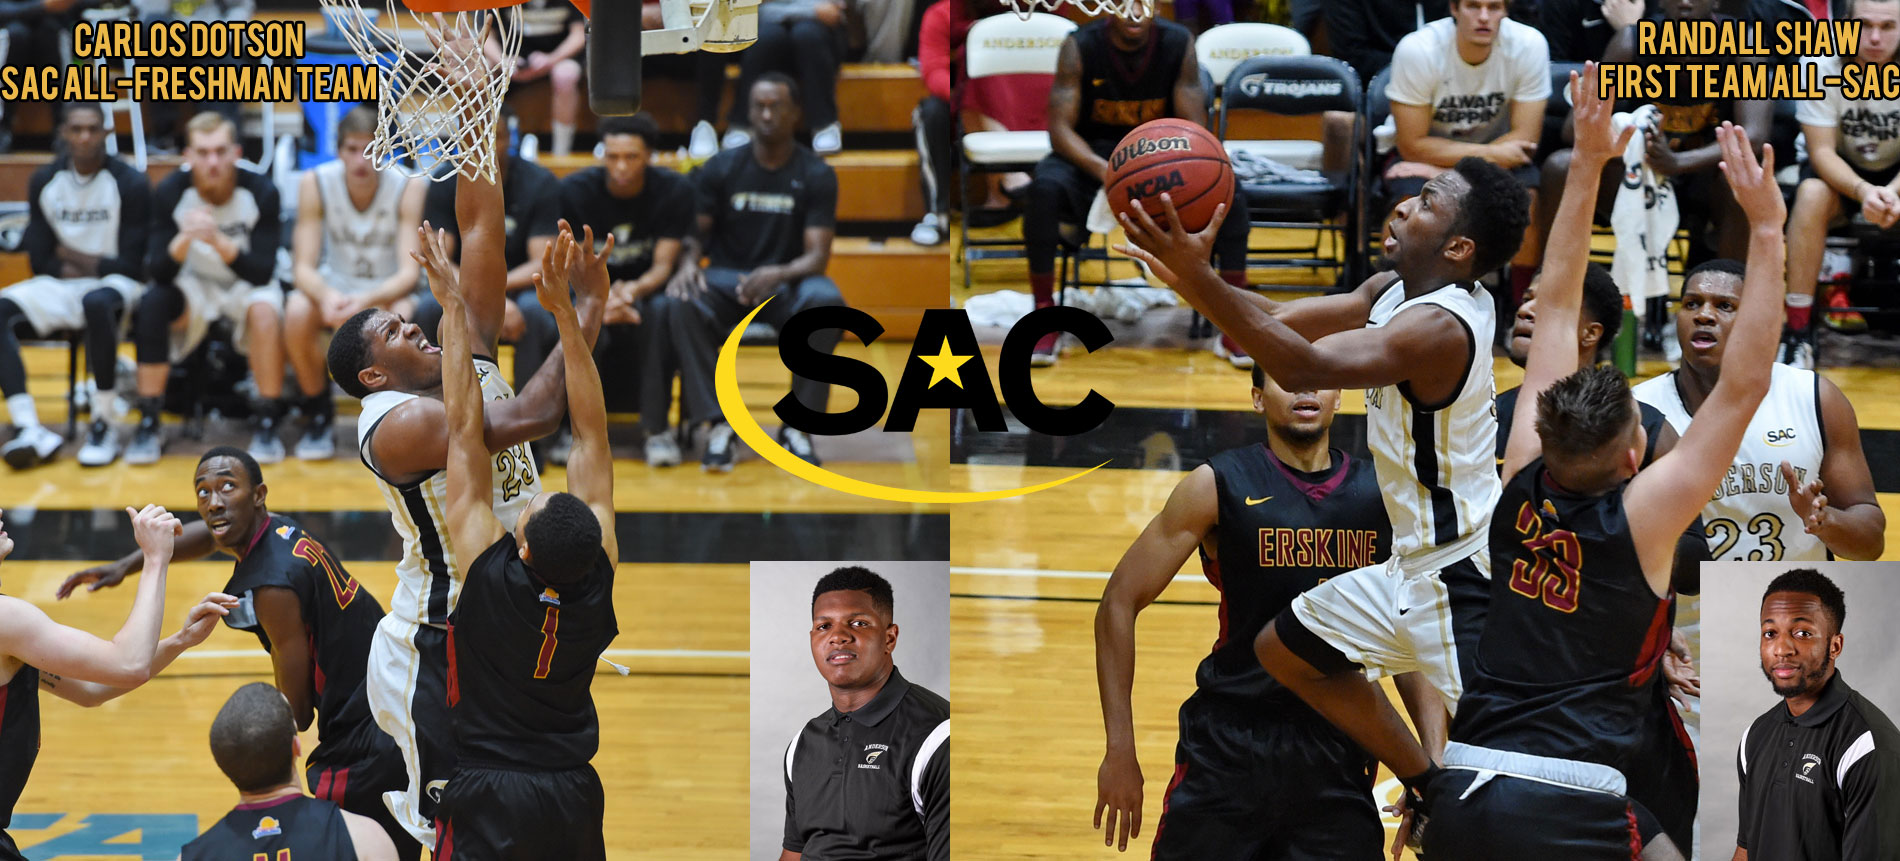 Shaw Captures First-Team All-SAC Honors; Dotson Earns All-Freshman Team Recognition